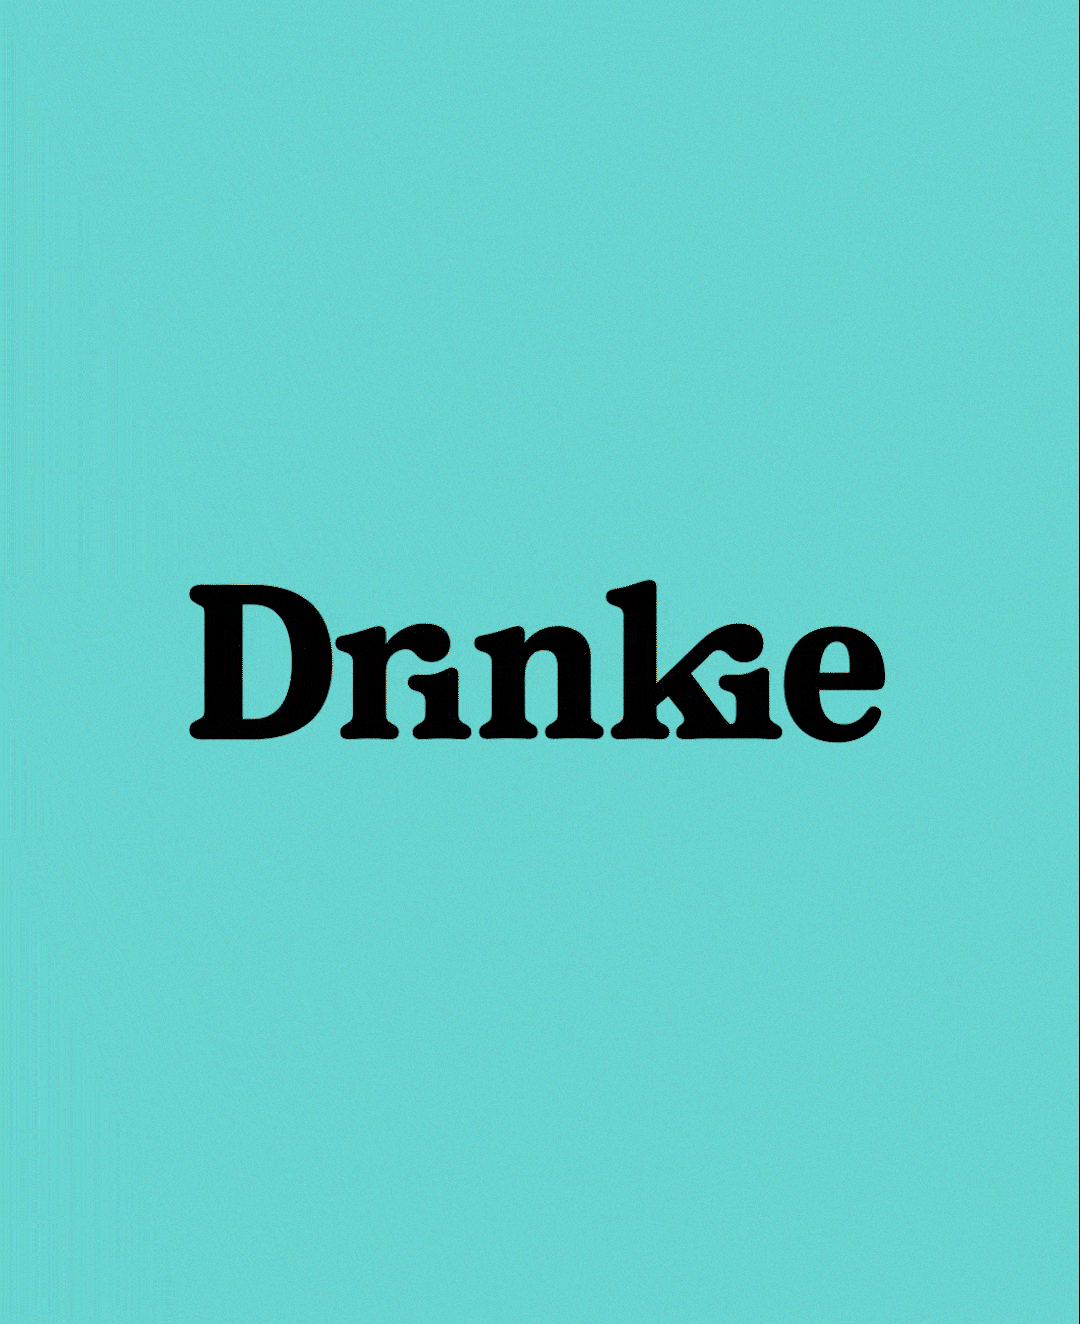 chloe-leget-drinkie-graphic-design-itsnicethat-09.gif